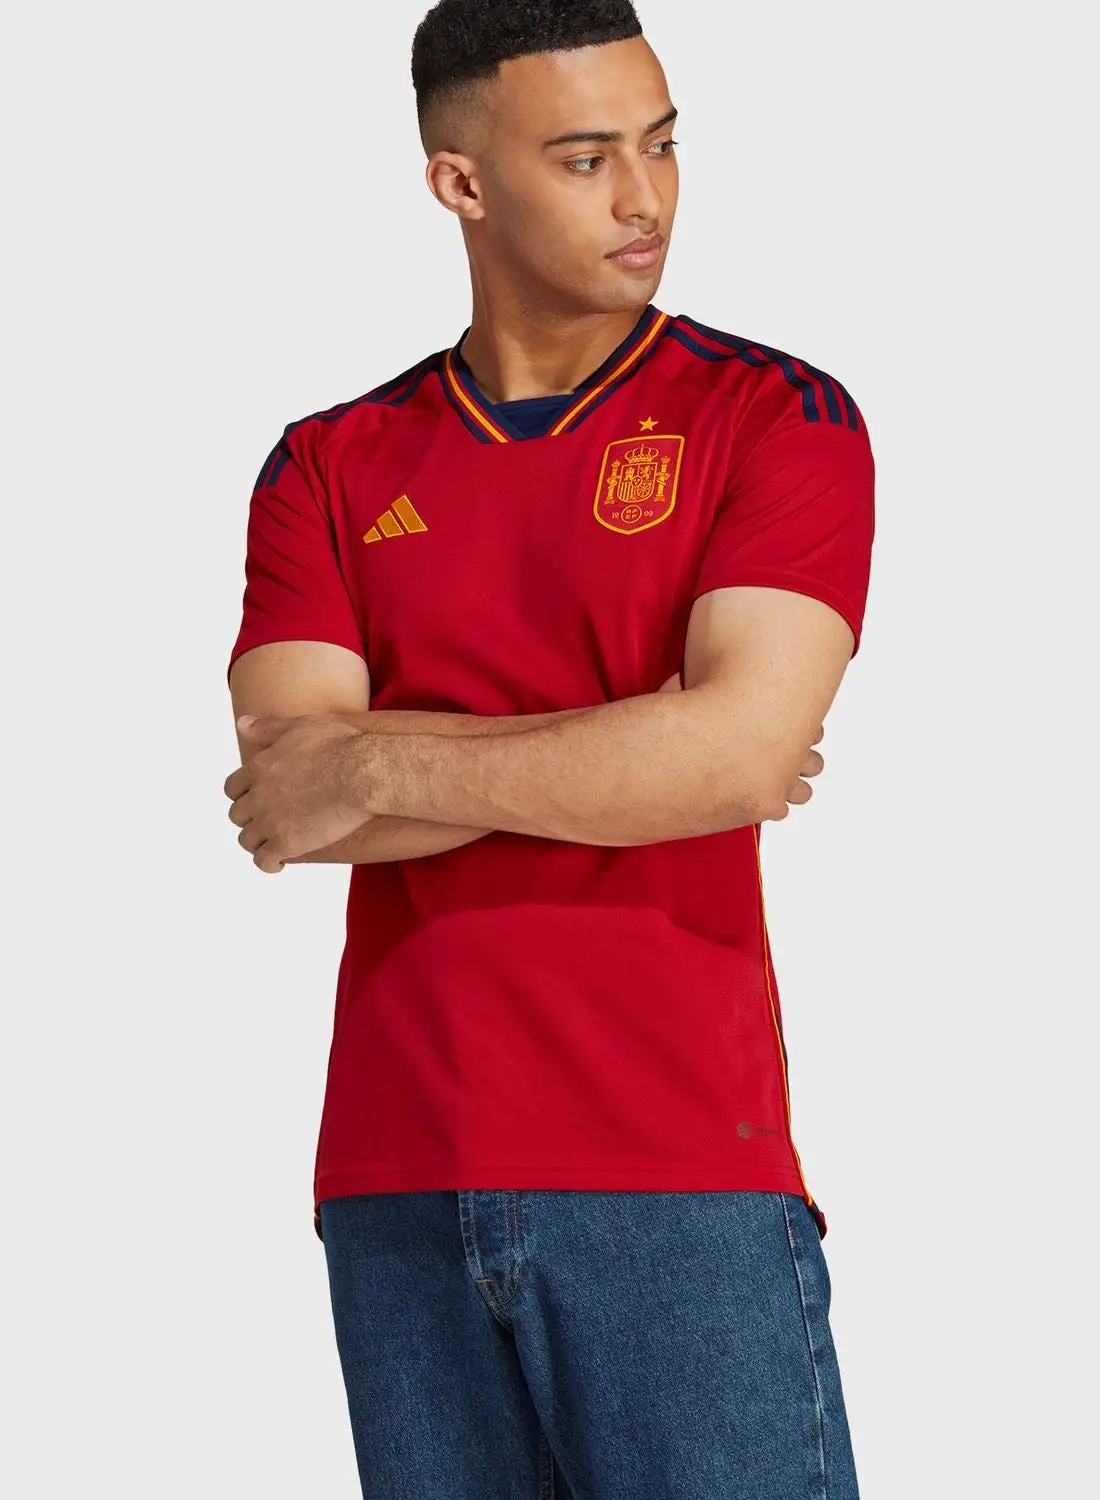 Adidas Spain Home Jersey